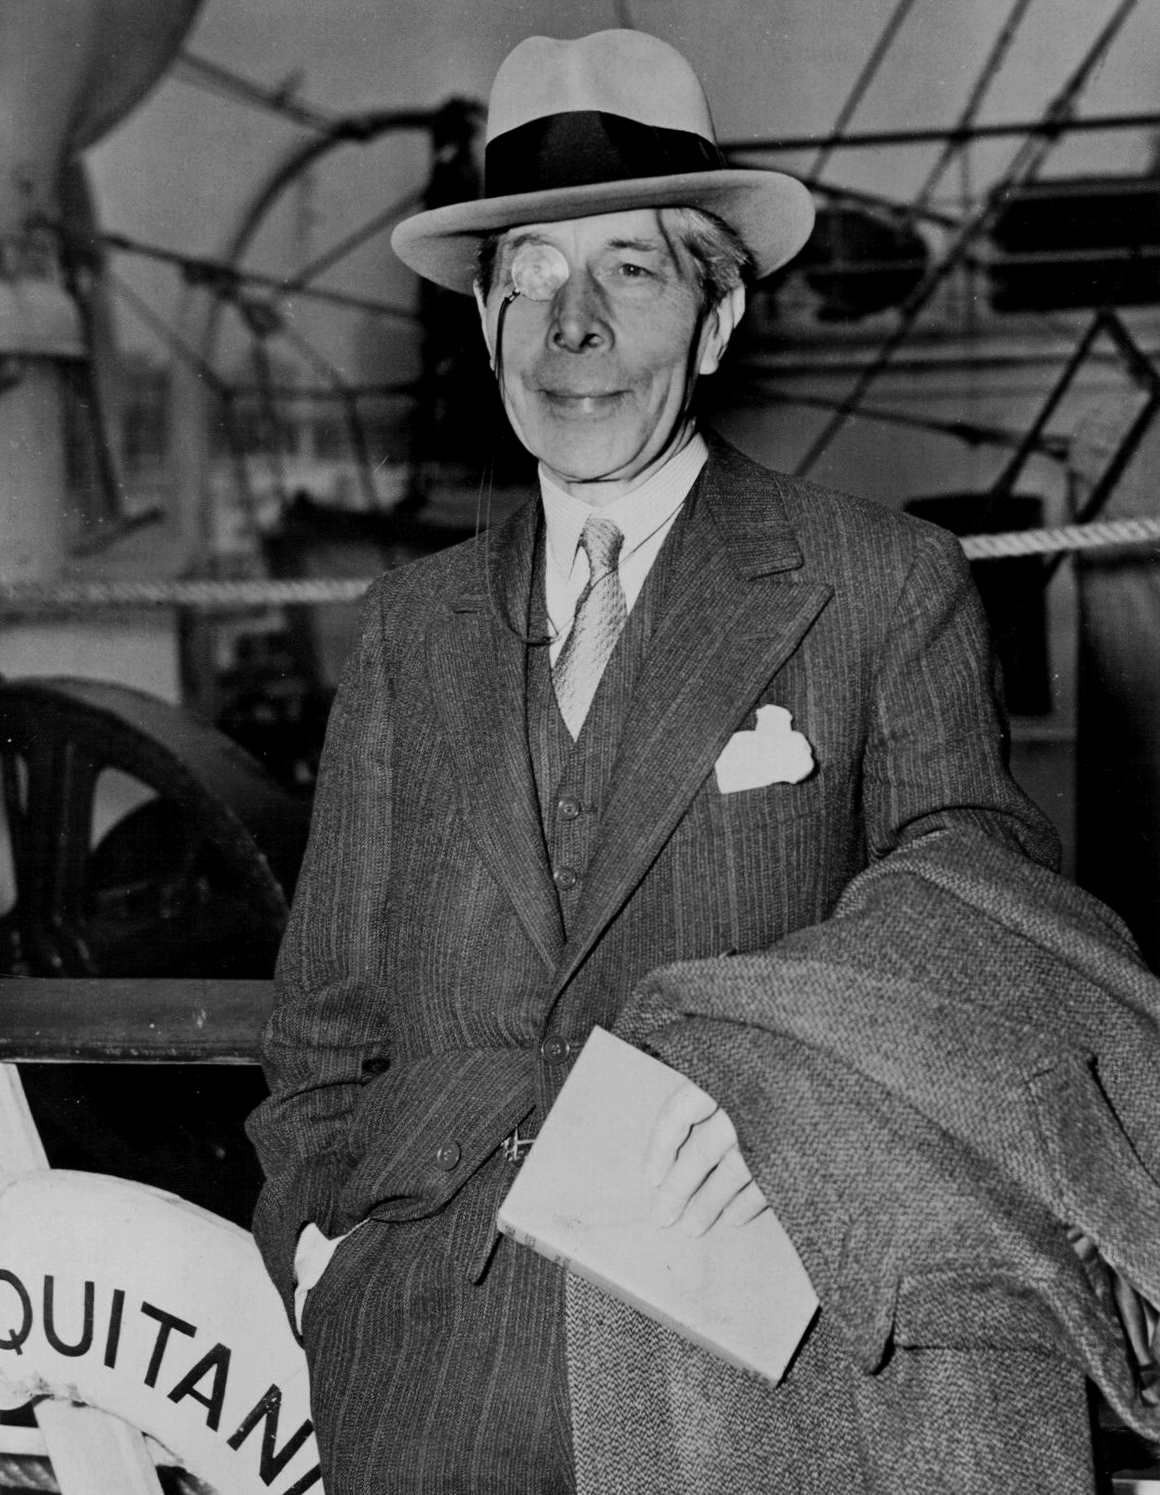 Arriving from Europe. New York City: – photo shows: – George Arliss, well known British film star, as he arrived on board the SS Aquitania, en route to the film capital. Mr Arliss is returning to the States after spending a vacation in his native England.